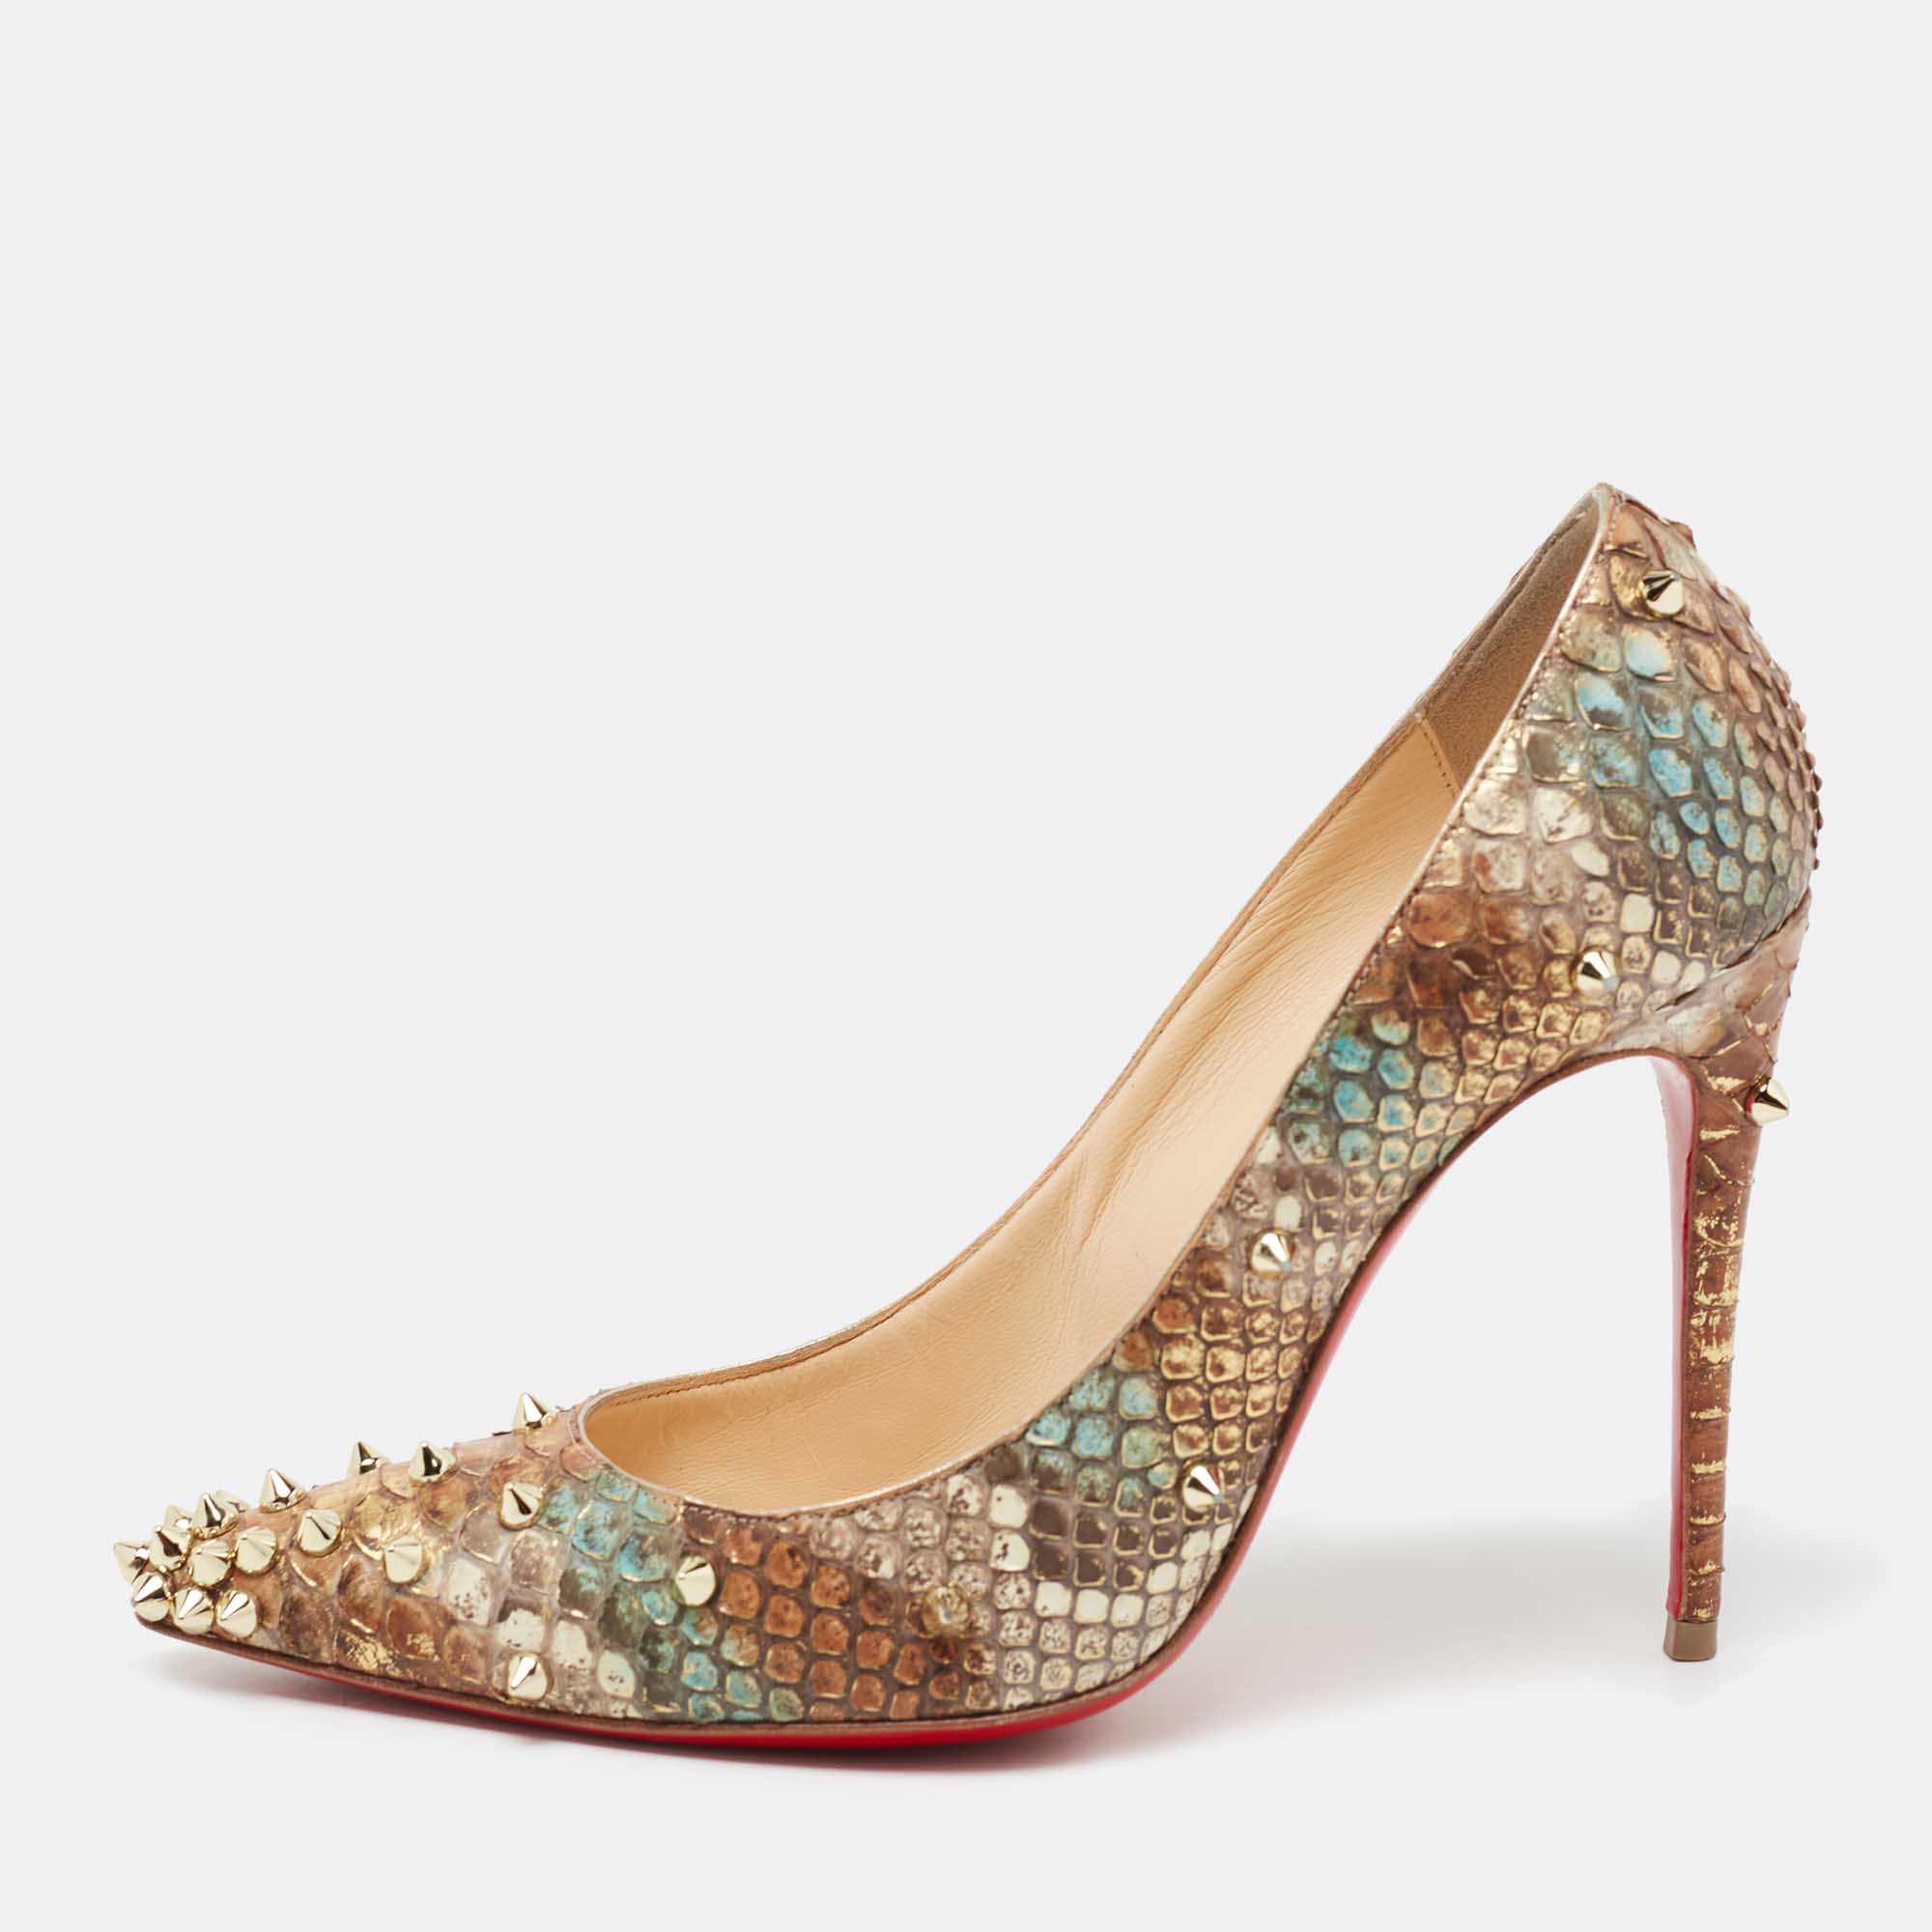 The addition of spikes makes this pair of Christian Louboutin pumps undeniably chic. Crafted from tri color python leather it features 10.5cm heels a signature red lacquered sole and an architectural shape.